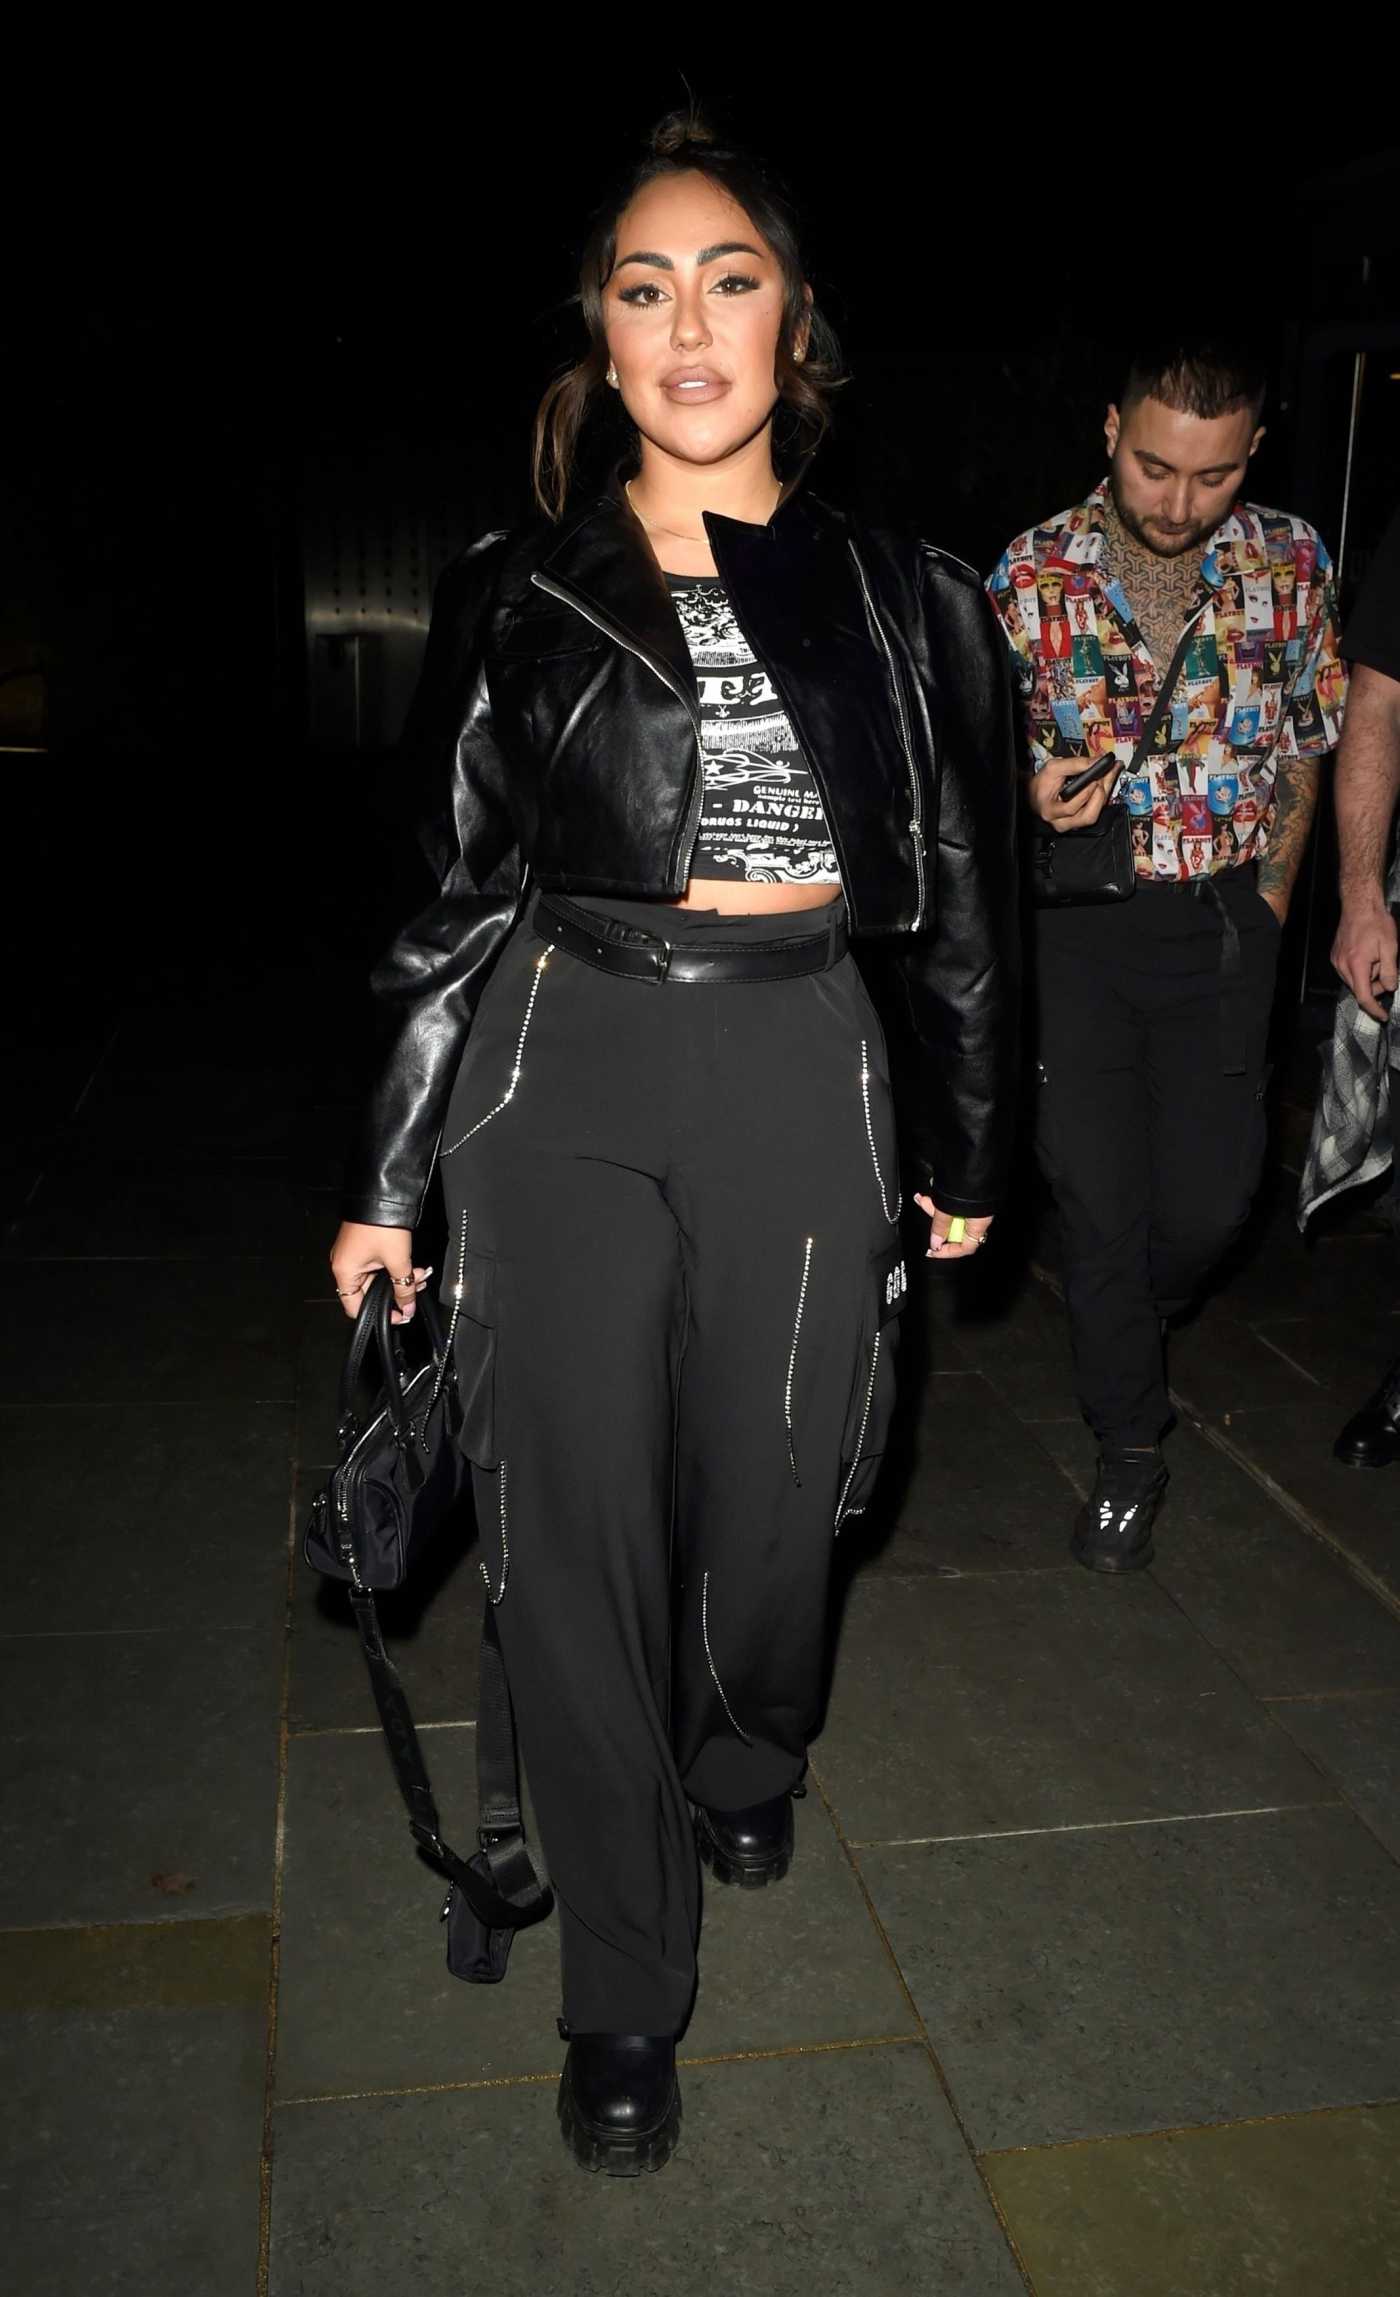 Sophie Kasaei in a Black Leather Jacket Enjoys a Night Out with Friends at Alberts Schloss in Manchester 02/15/2022